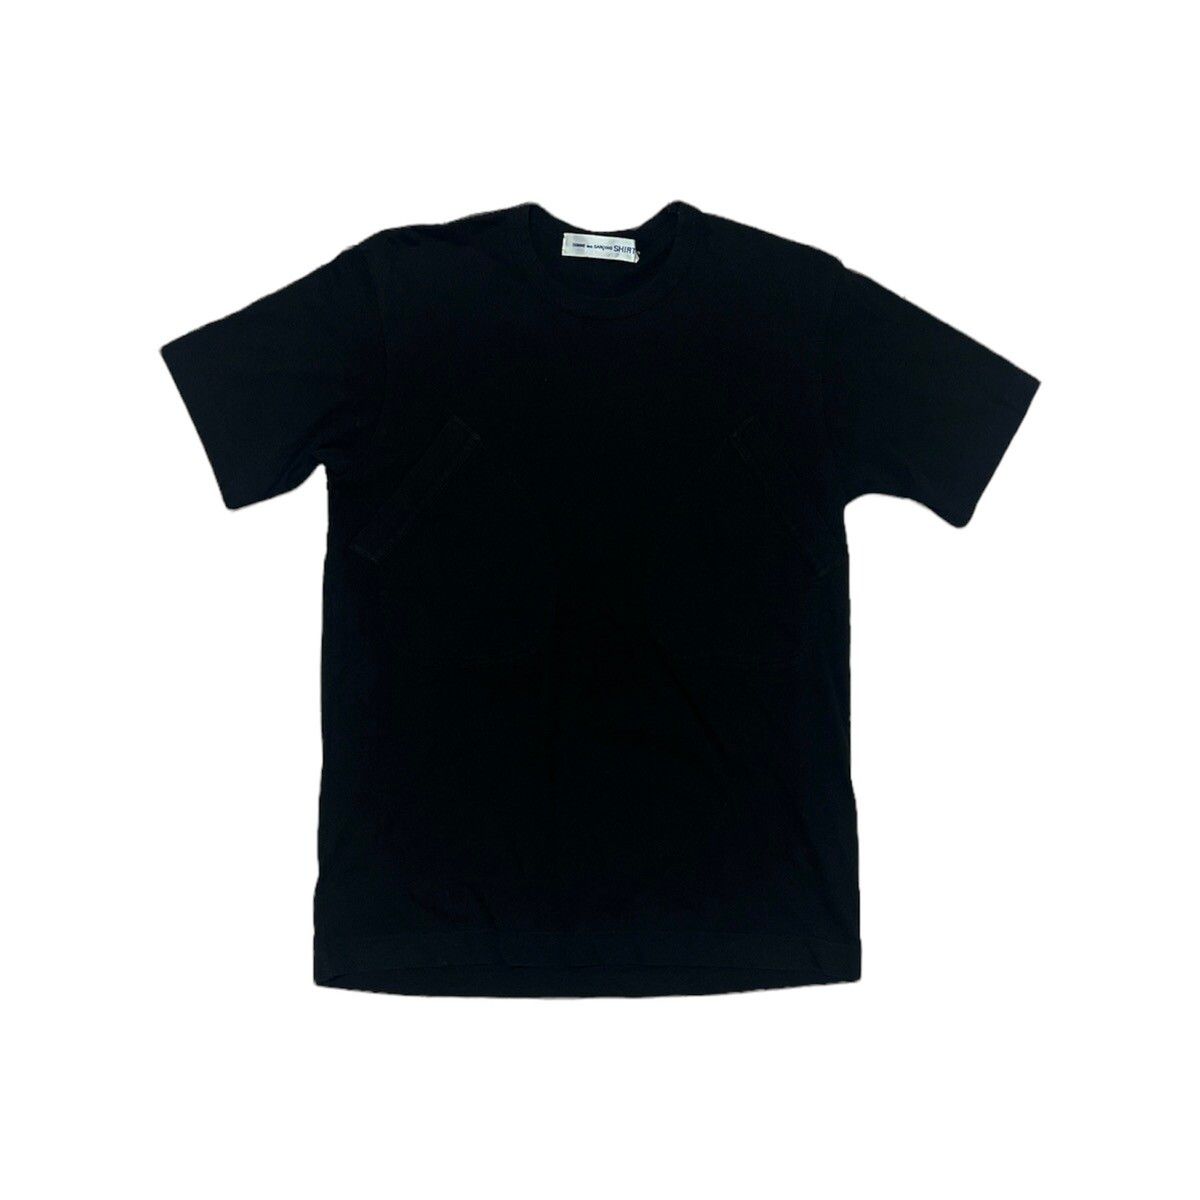 Comme des Garcons Shirt Double Picket Tee - 1